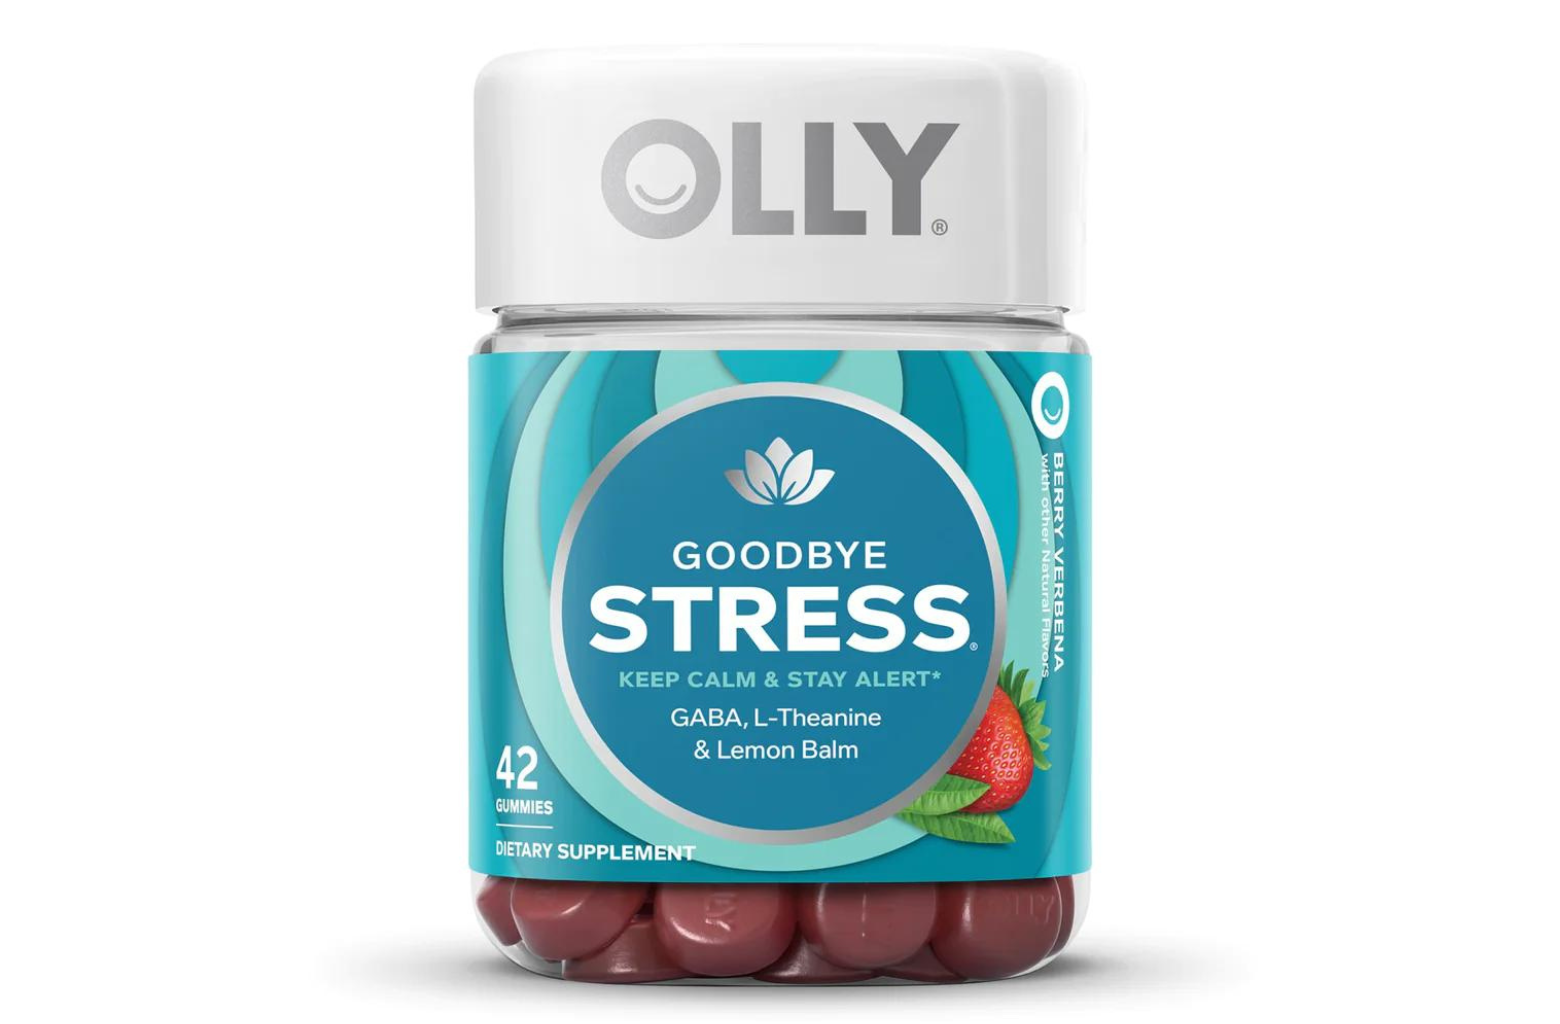 OLLY Women's Multivitamin Review - Sports Illustrated